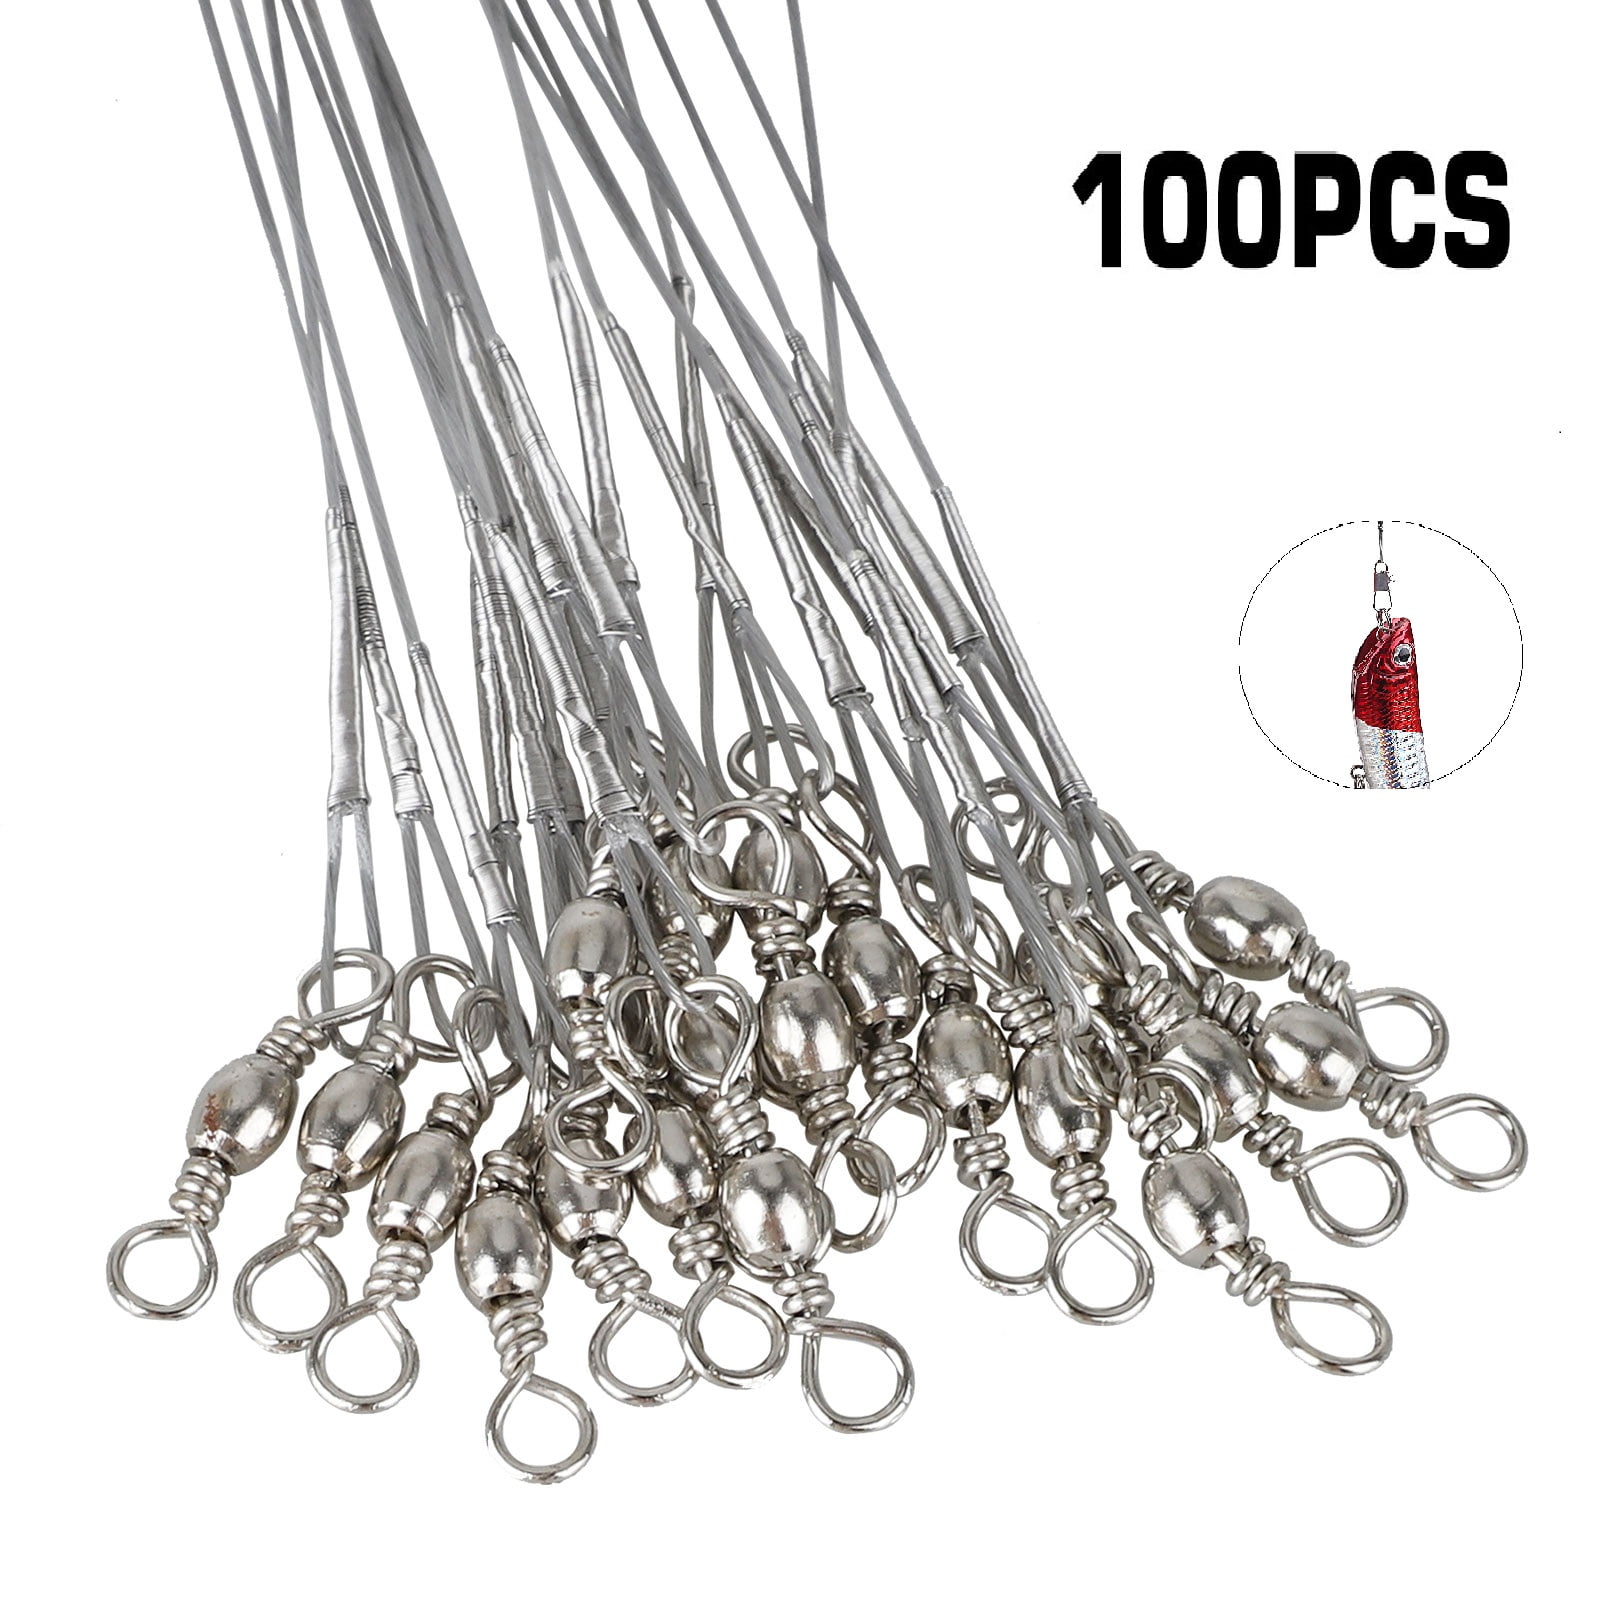 5Pcs Stainless Steel Coating Fishing Wire Leader Jigging Line Trace 7 Strands 